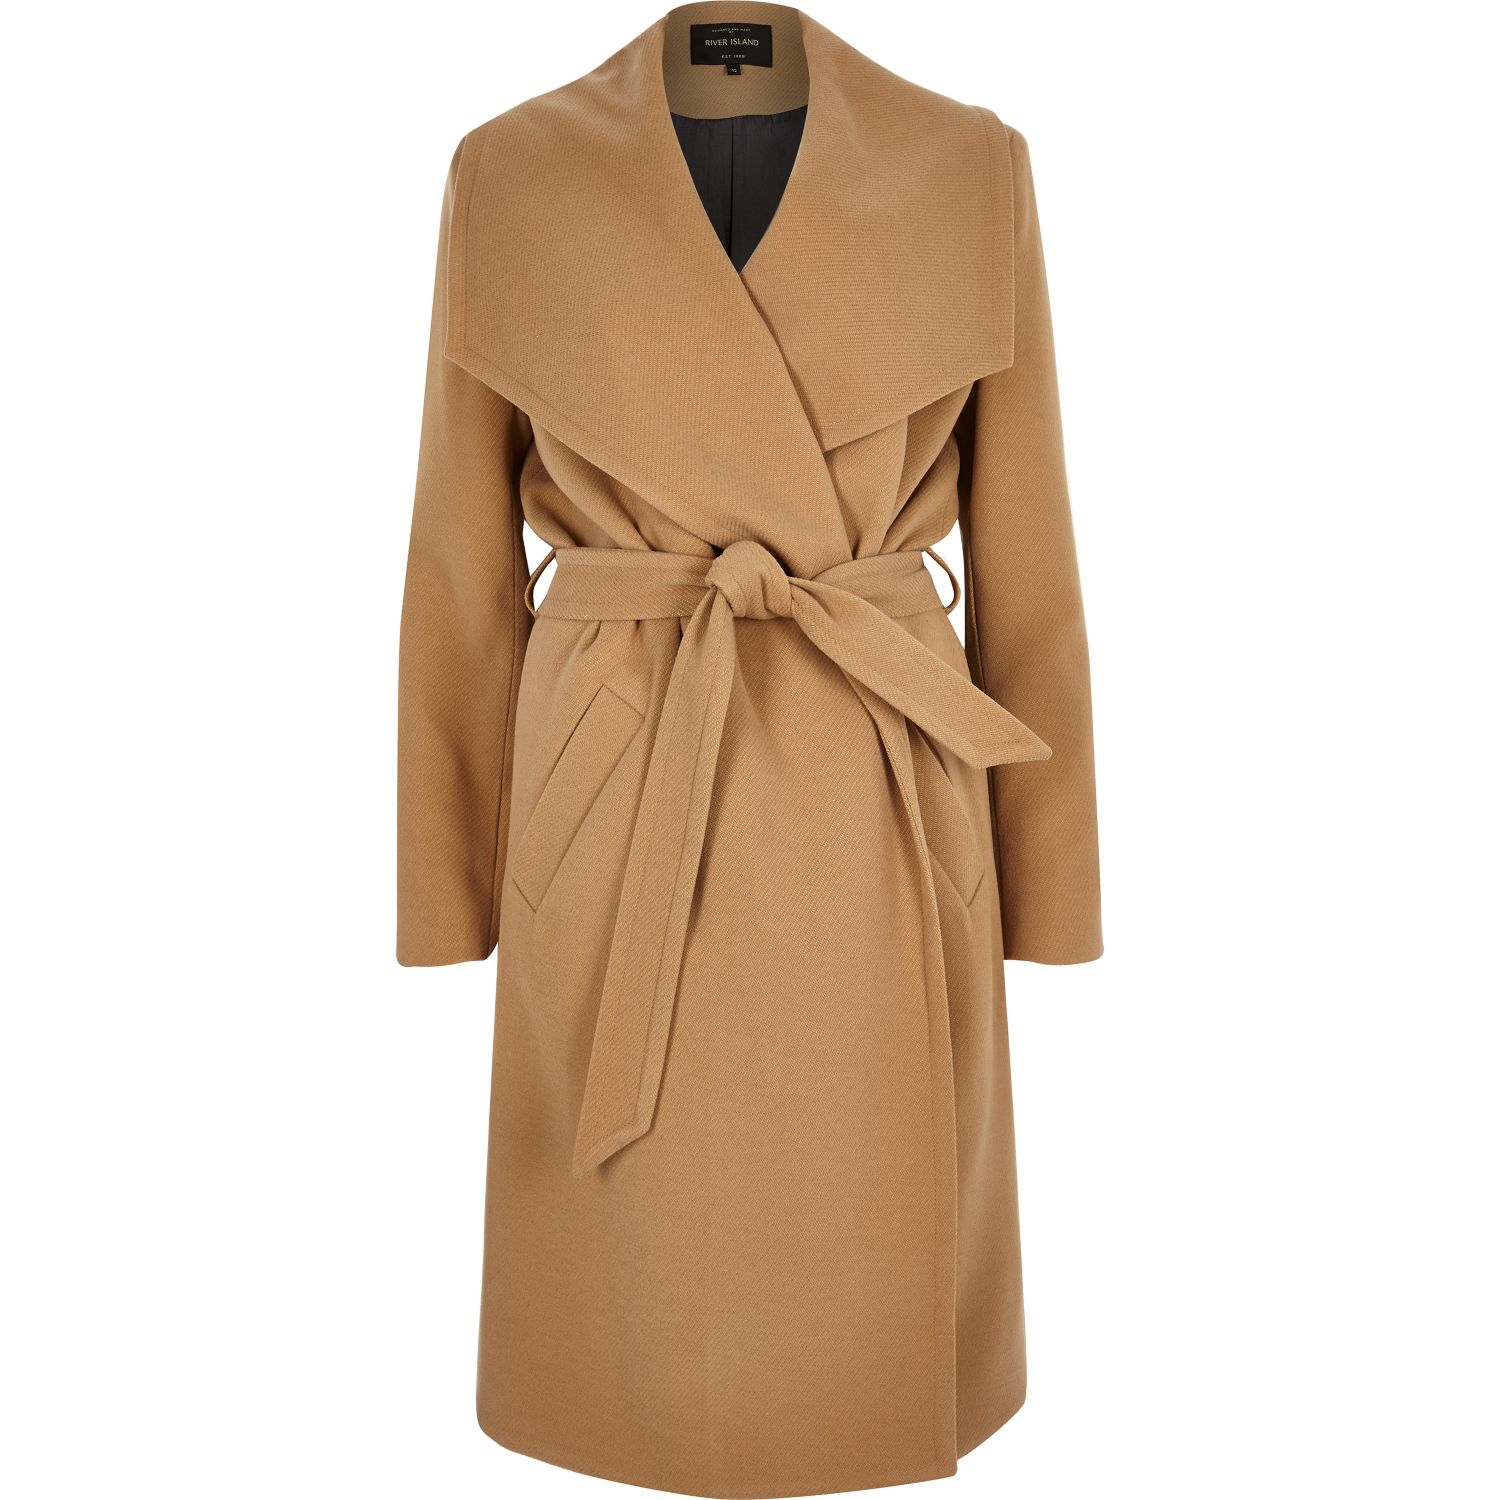 River island Camel Belted Robe Coat in Brown | Lyst